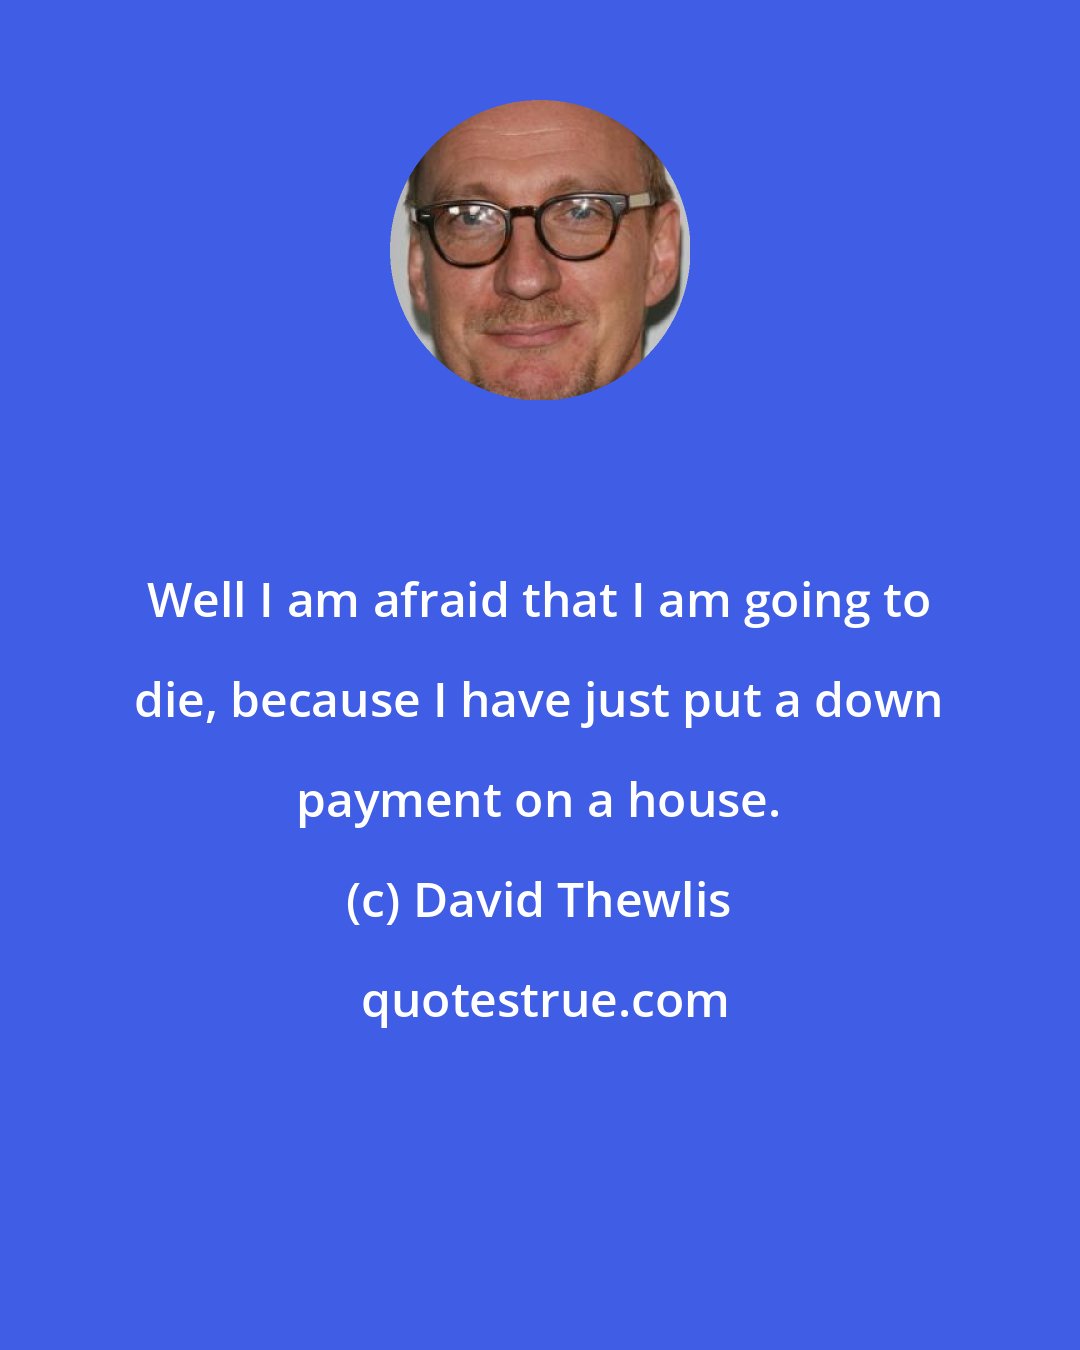 David Thewlis: Well I am afraid that I am going to die, because I have just put a down payment on a house.